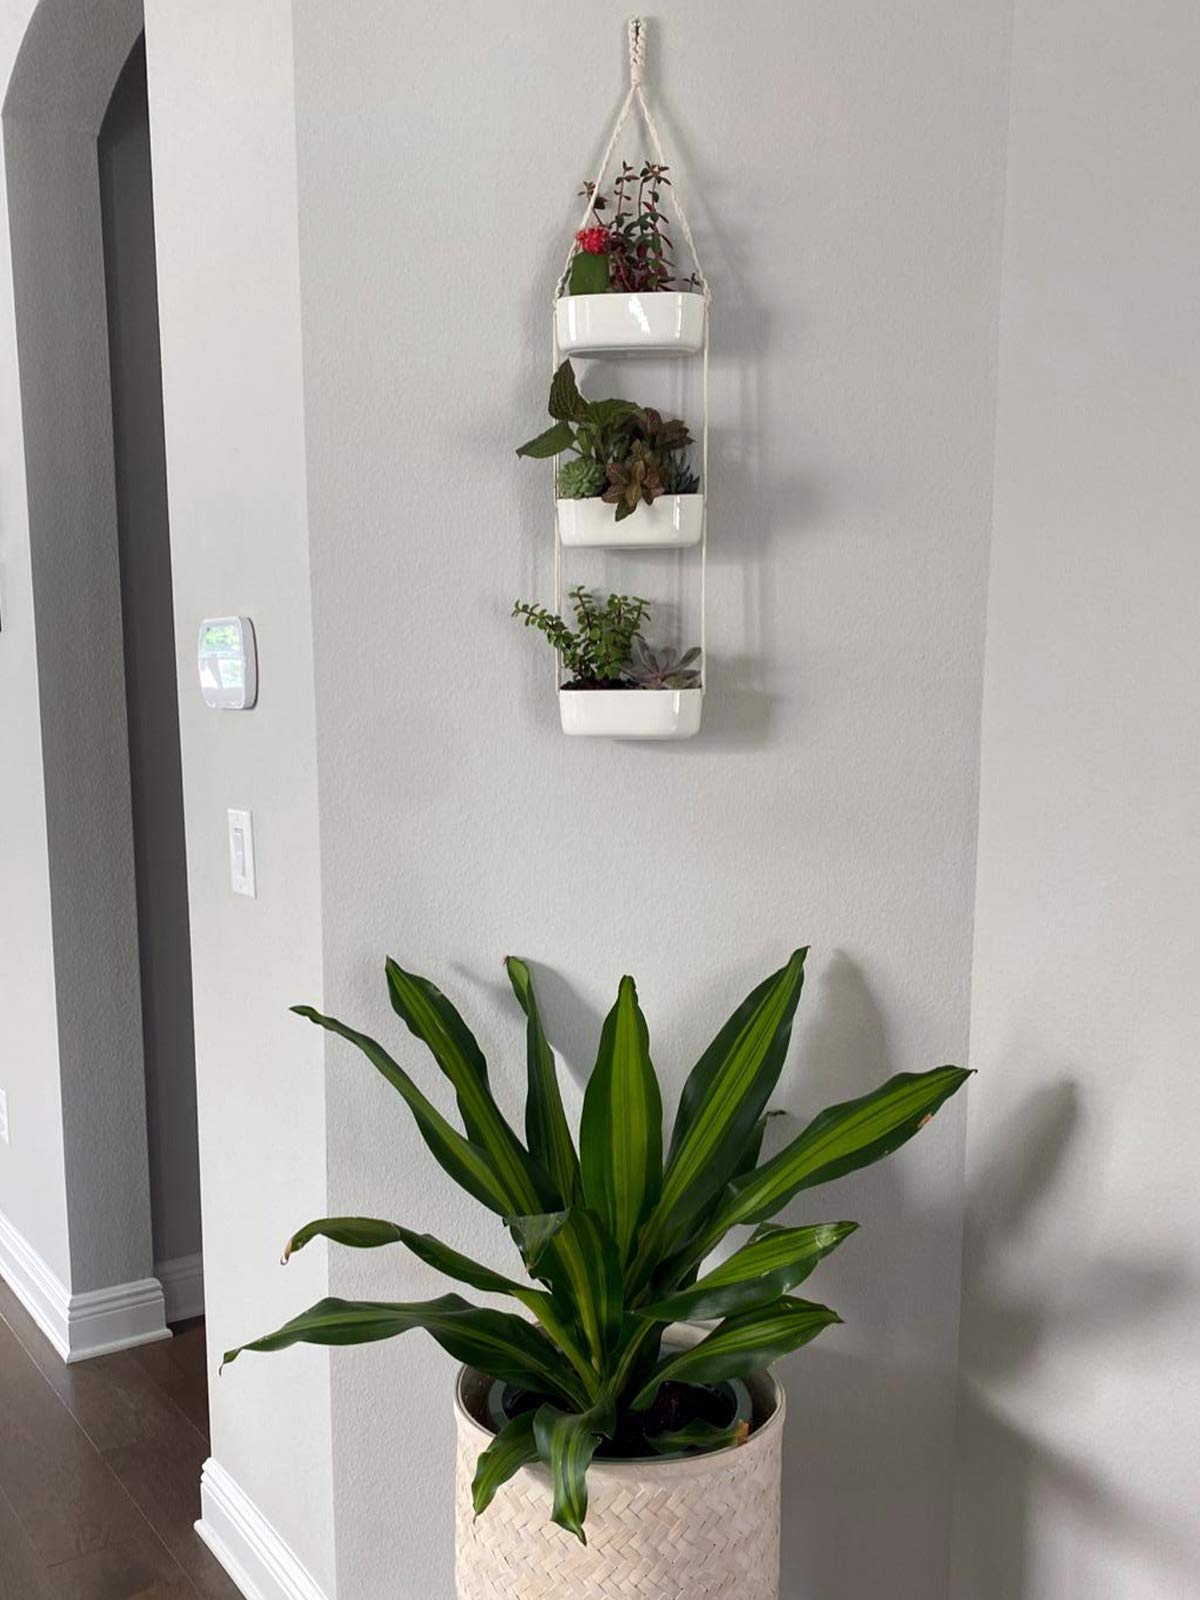 Mkono Hanging Planter Wall Planter for Indoor Plants, Flower Plant Ceramic Pots for Succulent Herb Air Plant Holder Faux Plants Vertical Garden, Home Office Decor 3 Tier, White (Plant Not Included)